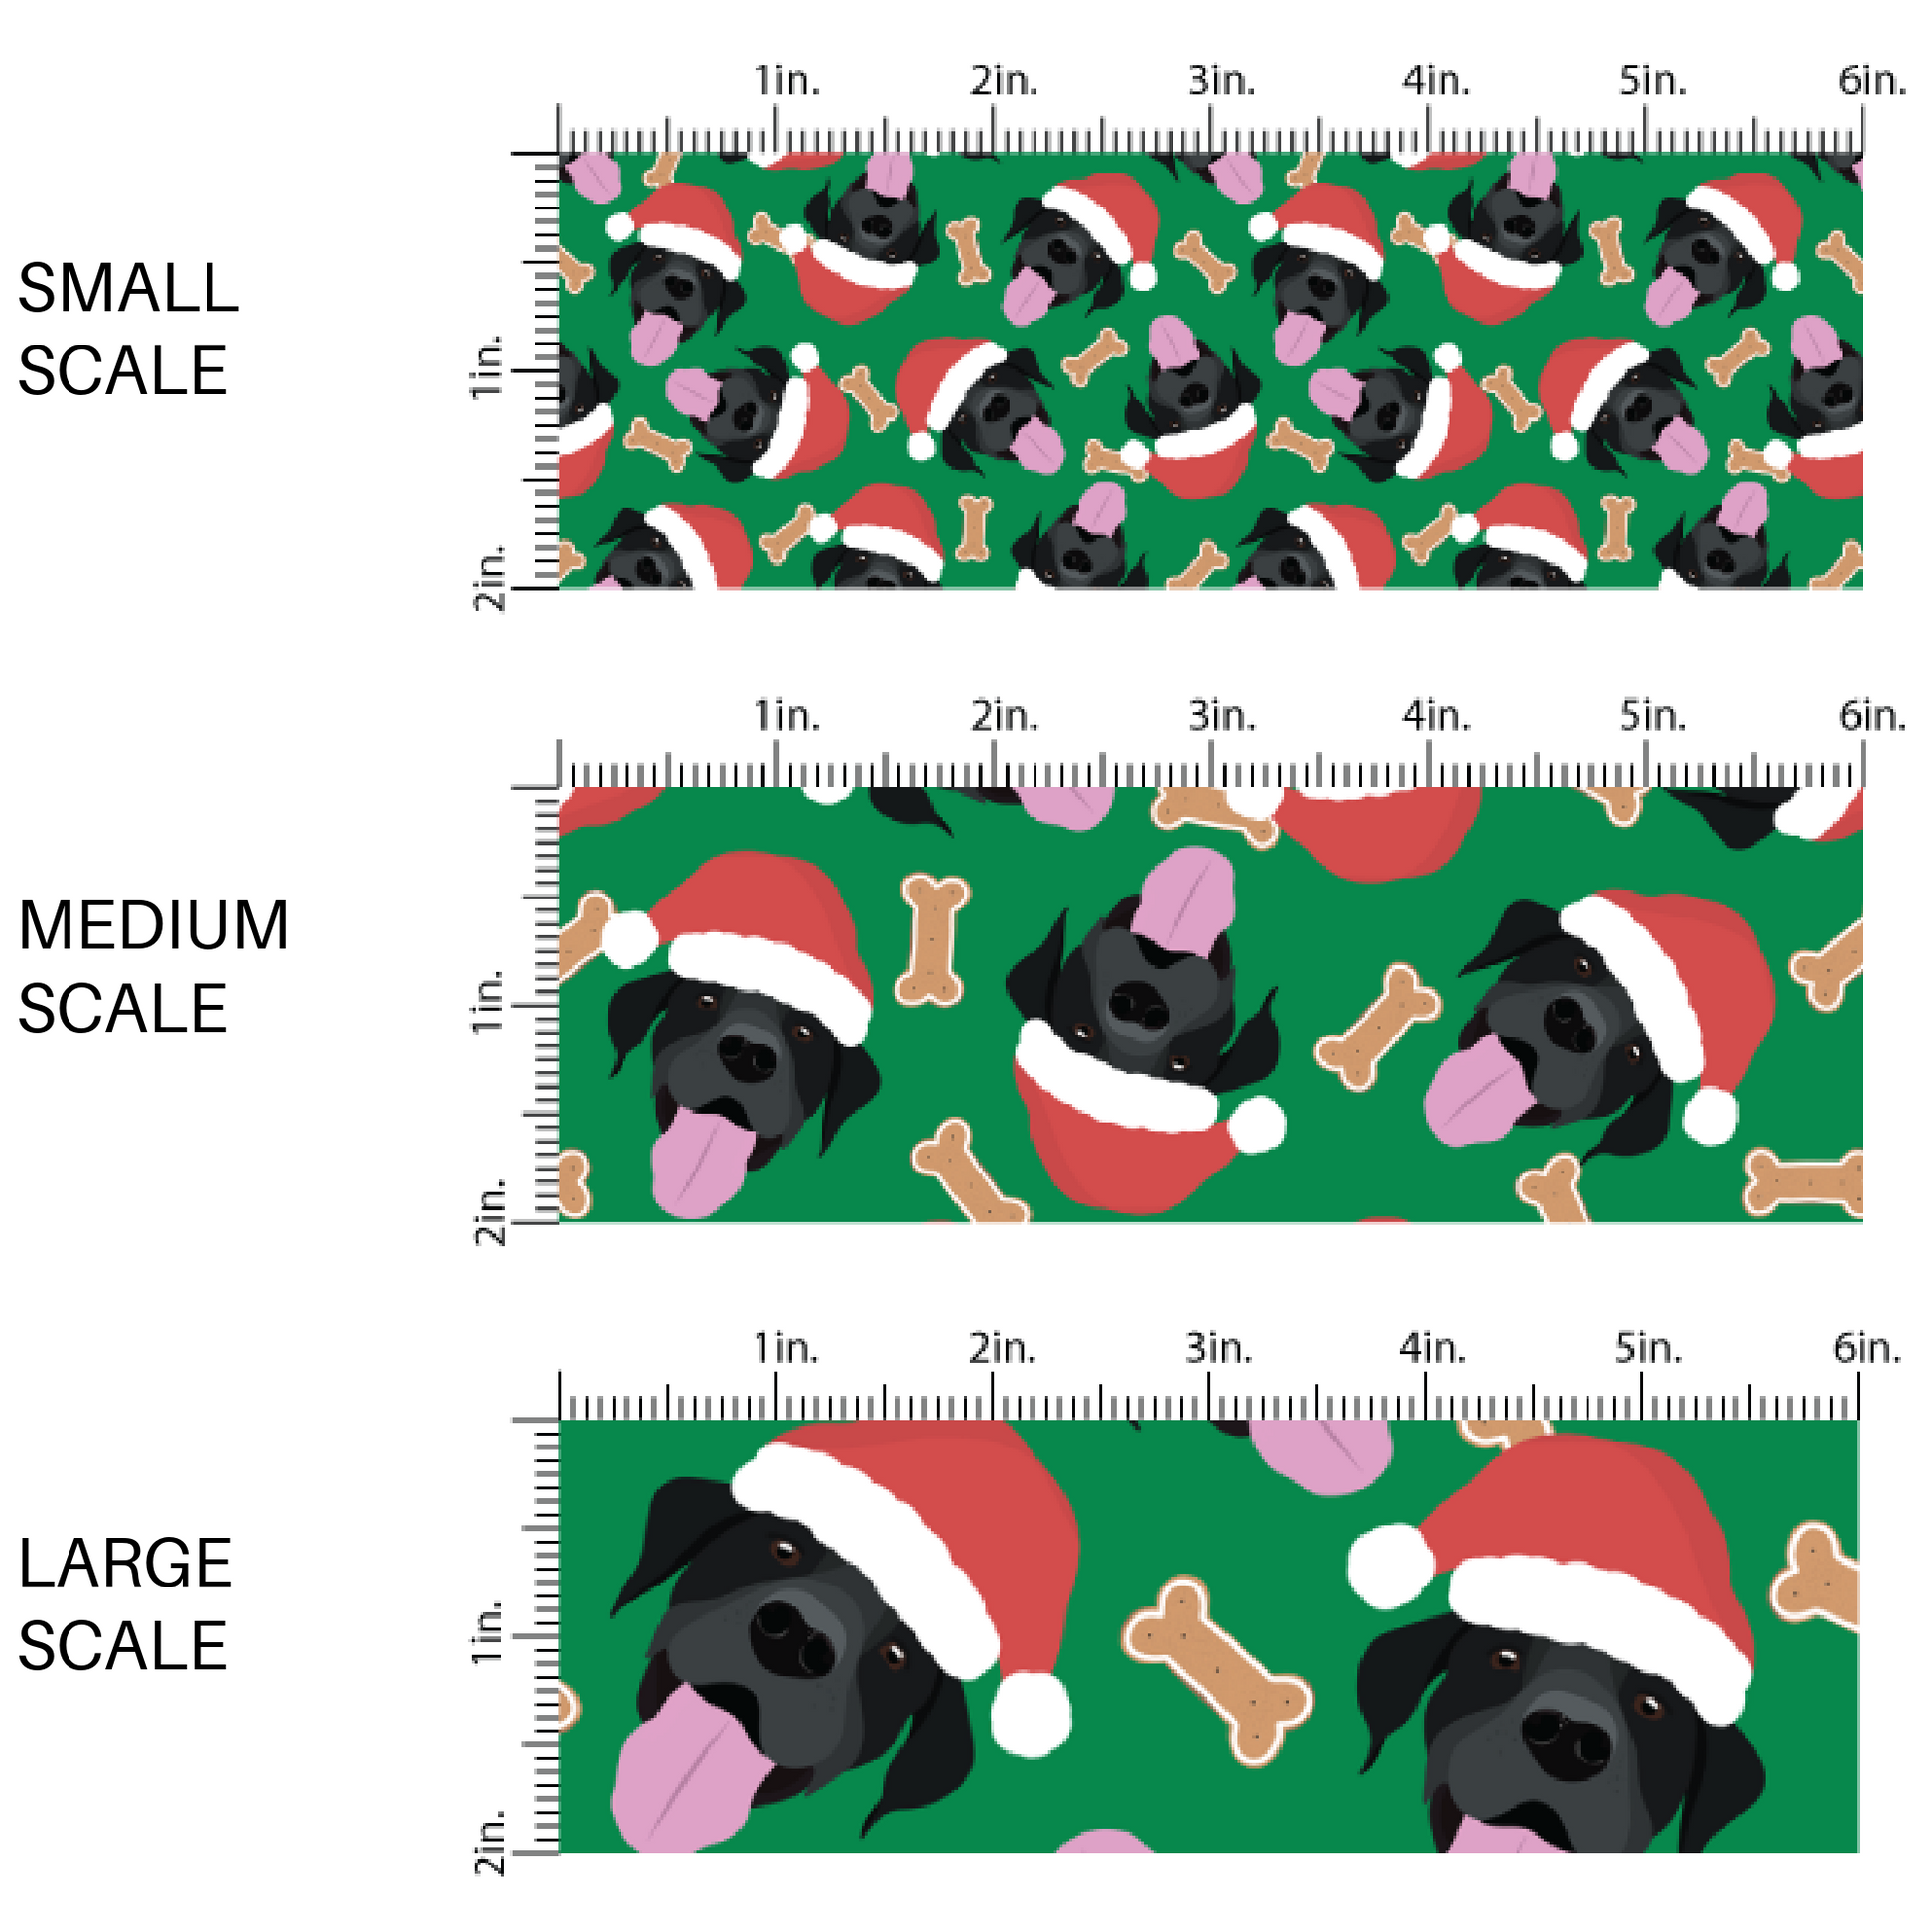 These holiday themed fabric by the yard features black lab dogs with Christmas hats surrounded by dog bone treats on dark green. This fun Christmas fabric can be used for all your sewing and crafting needs!